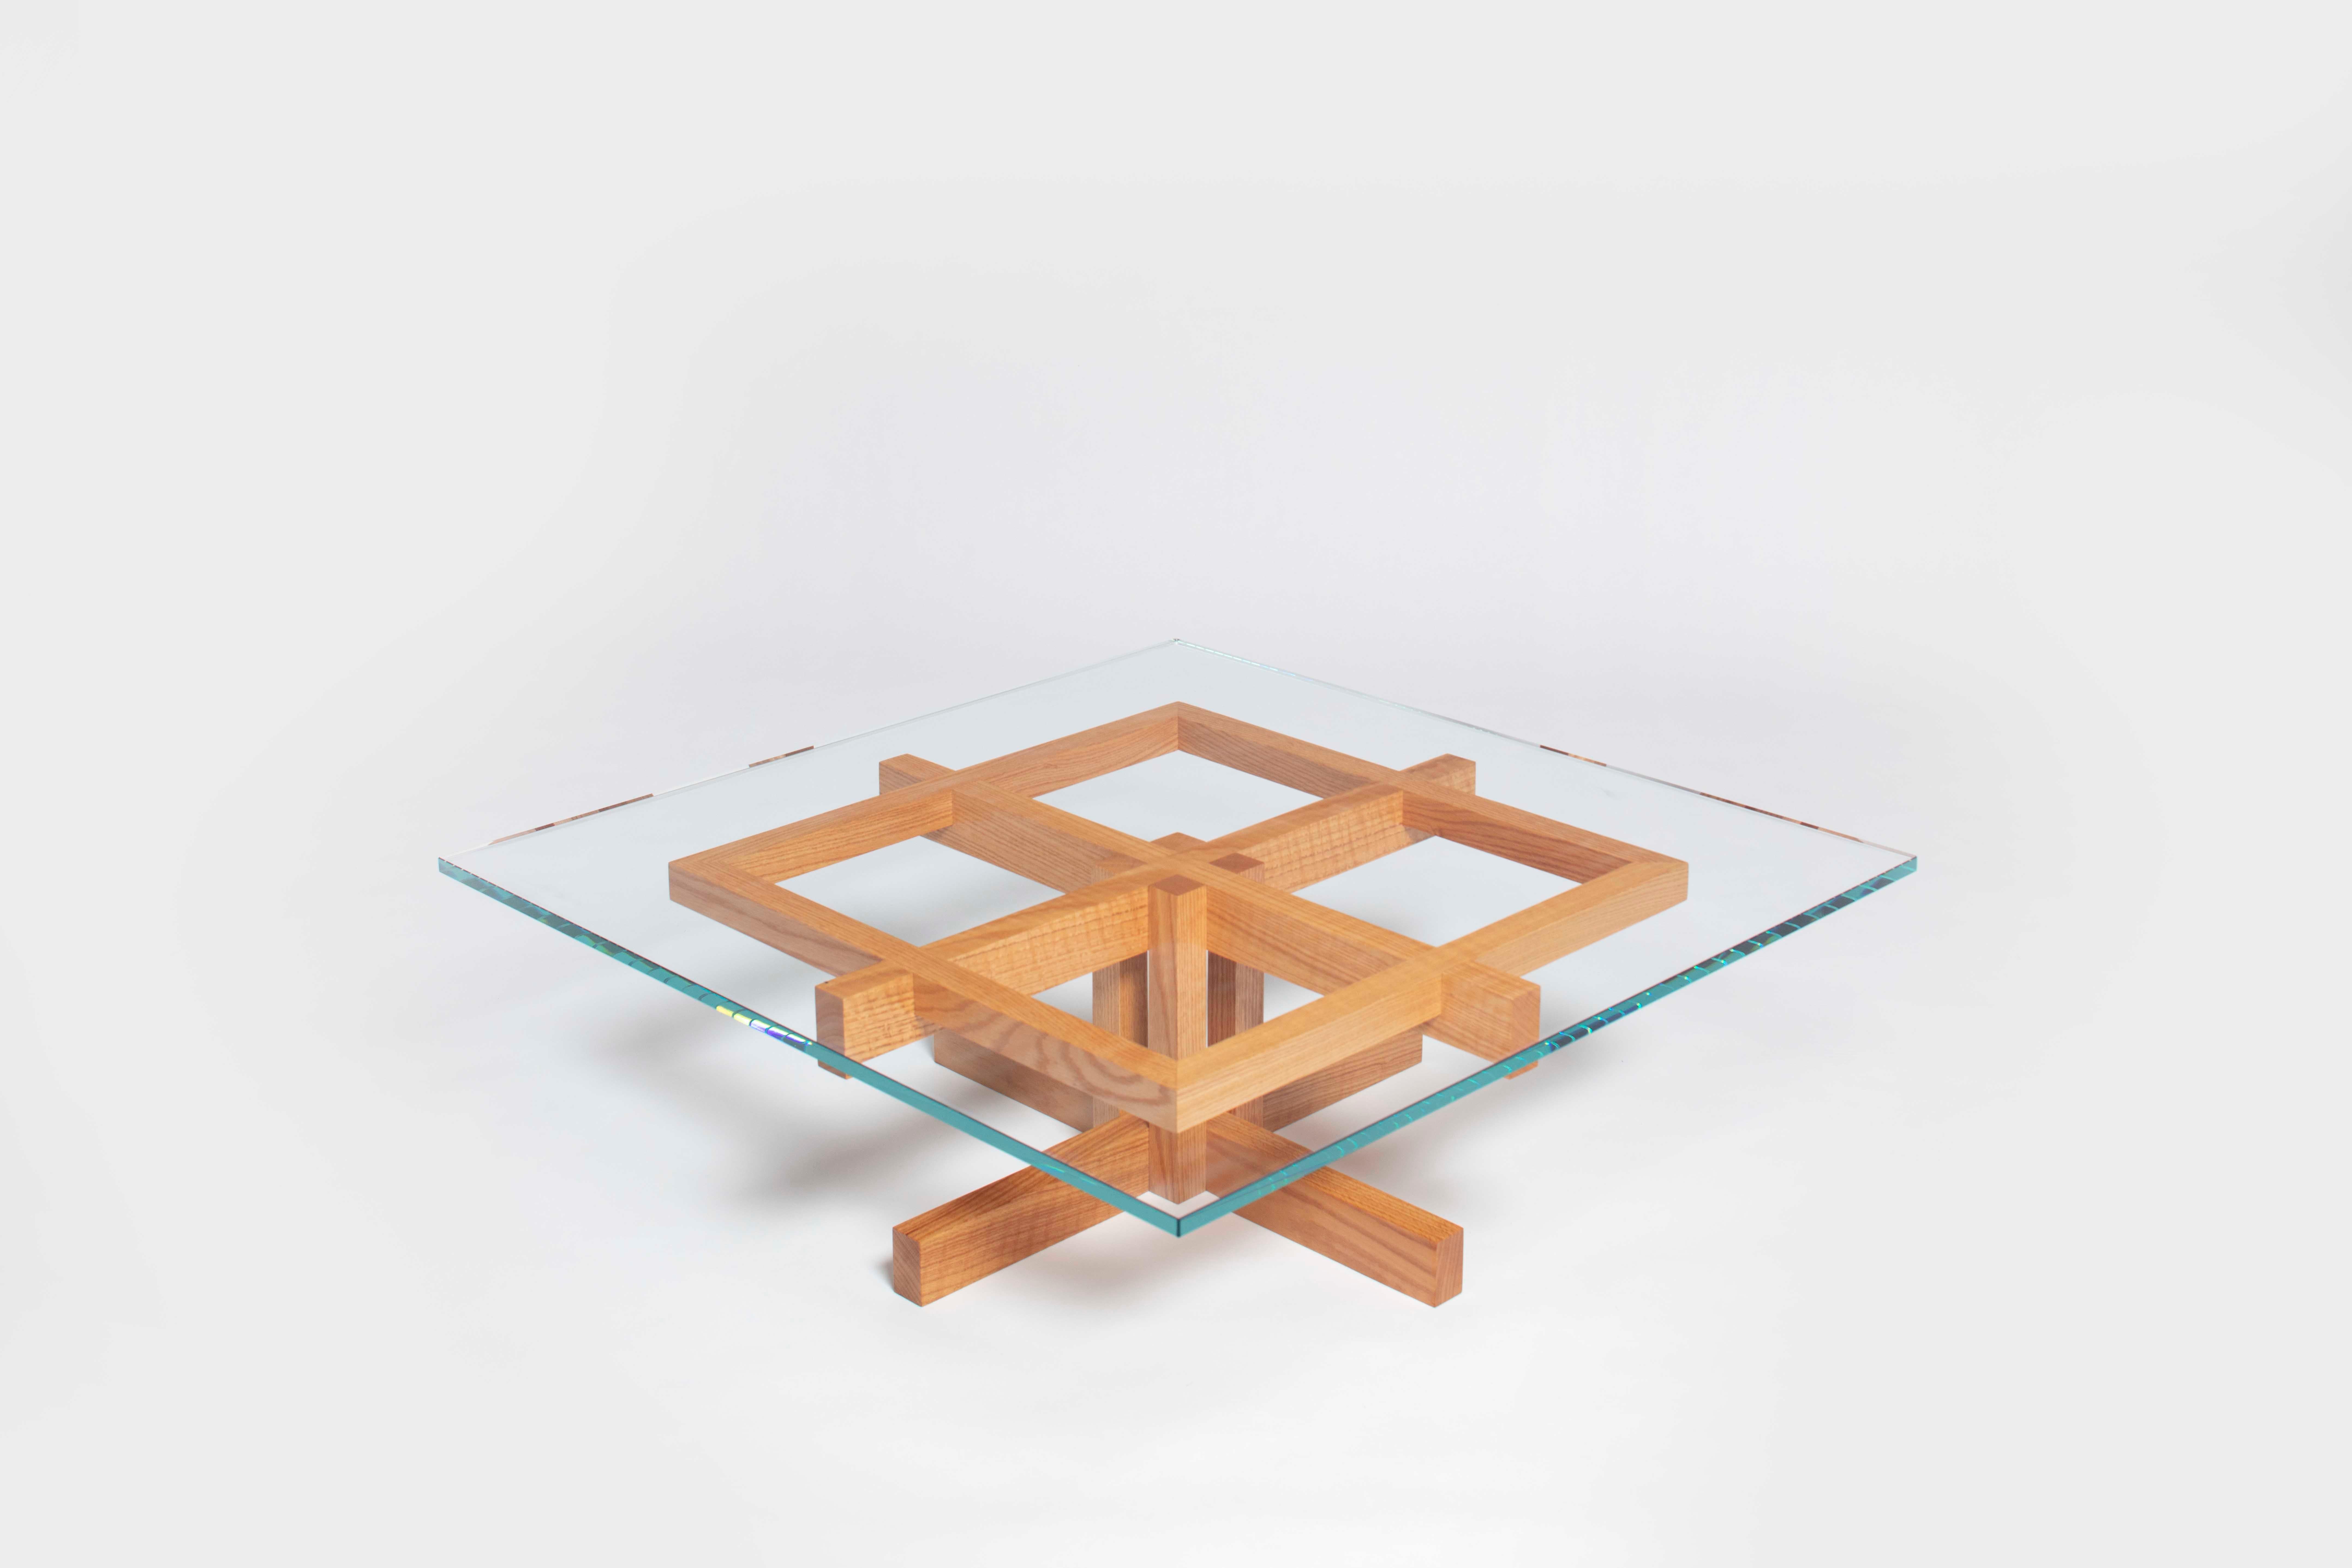 Ray Kappe RK10 coffee table in red oak by Original in Berlin, Germany, 2020

California Modernism is synonymous with sophisticated minimal structures, featuring open plan design and indoor-outdoor living, inspired by traditional Japanese